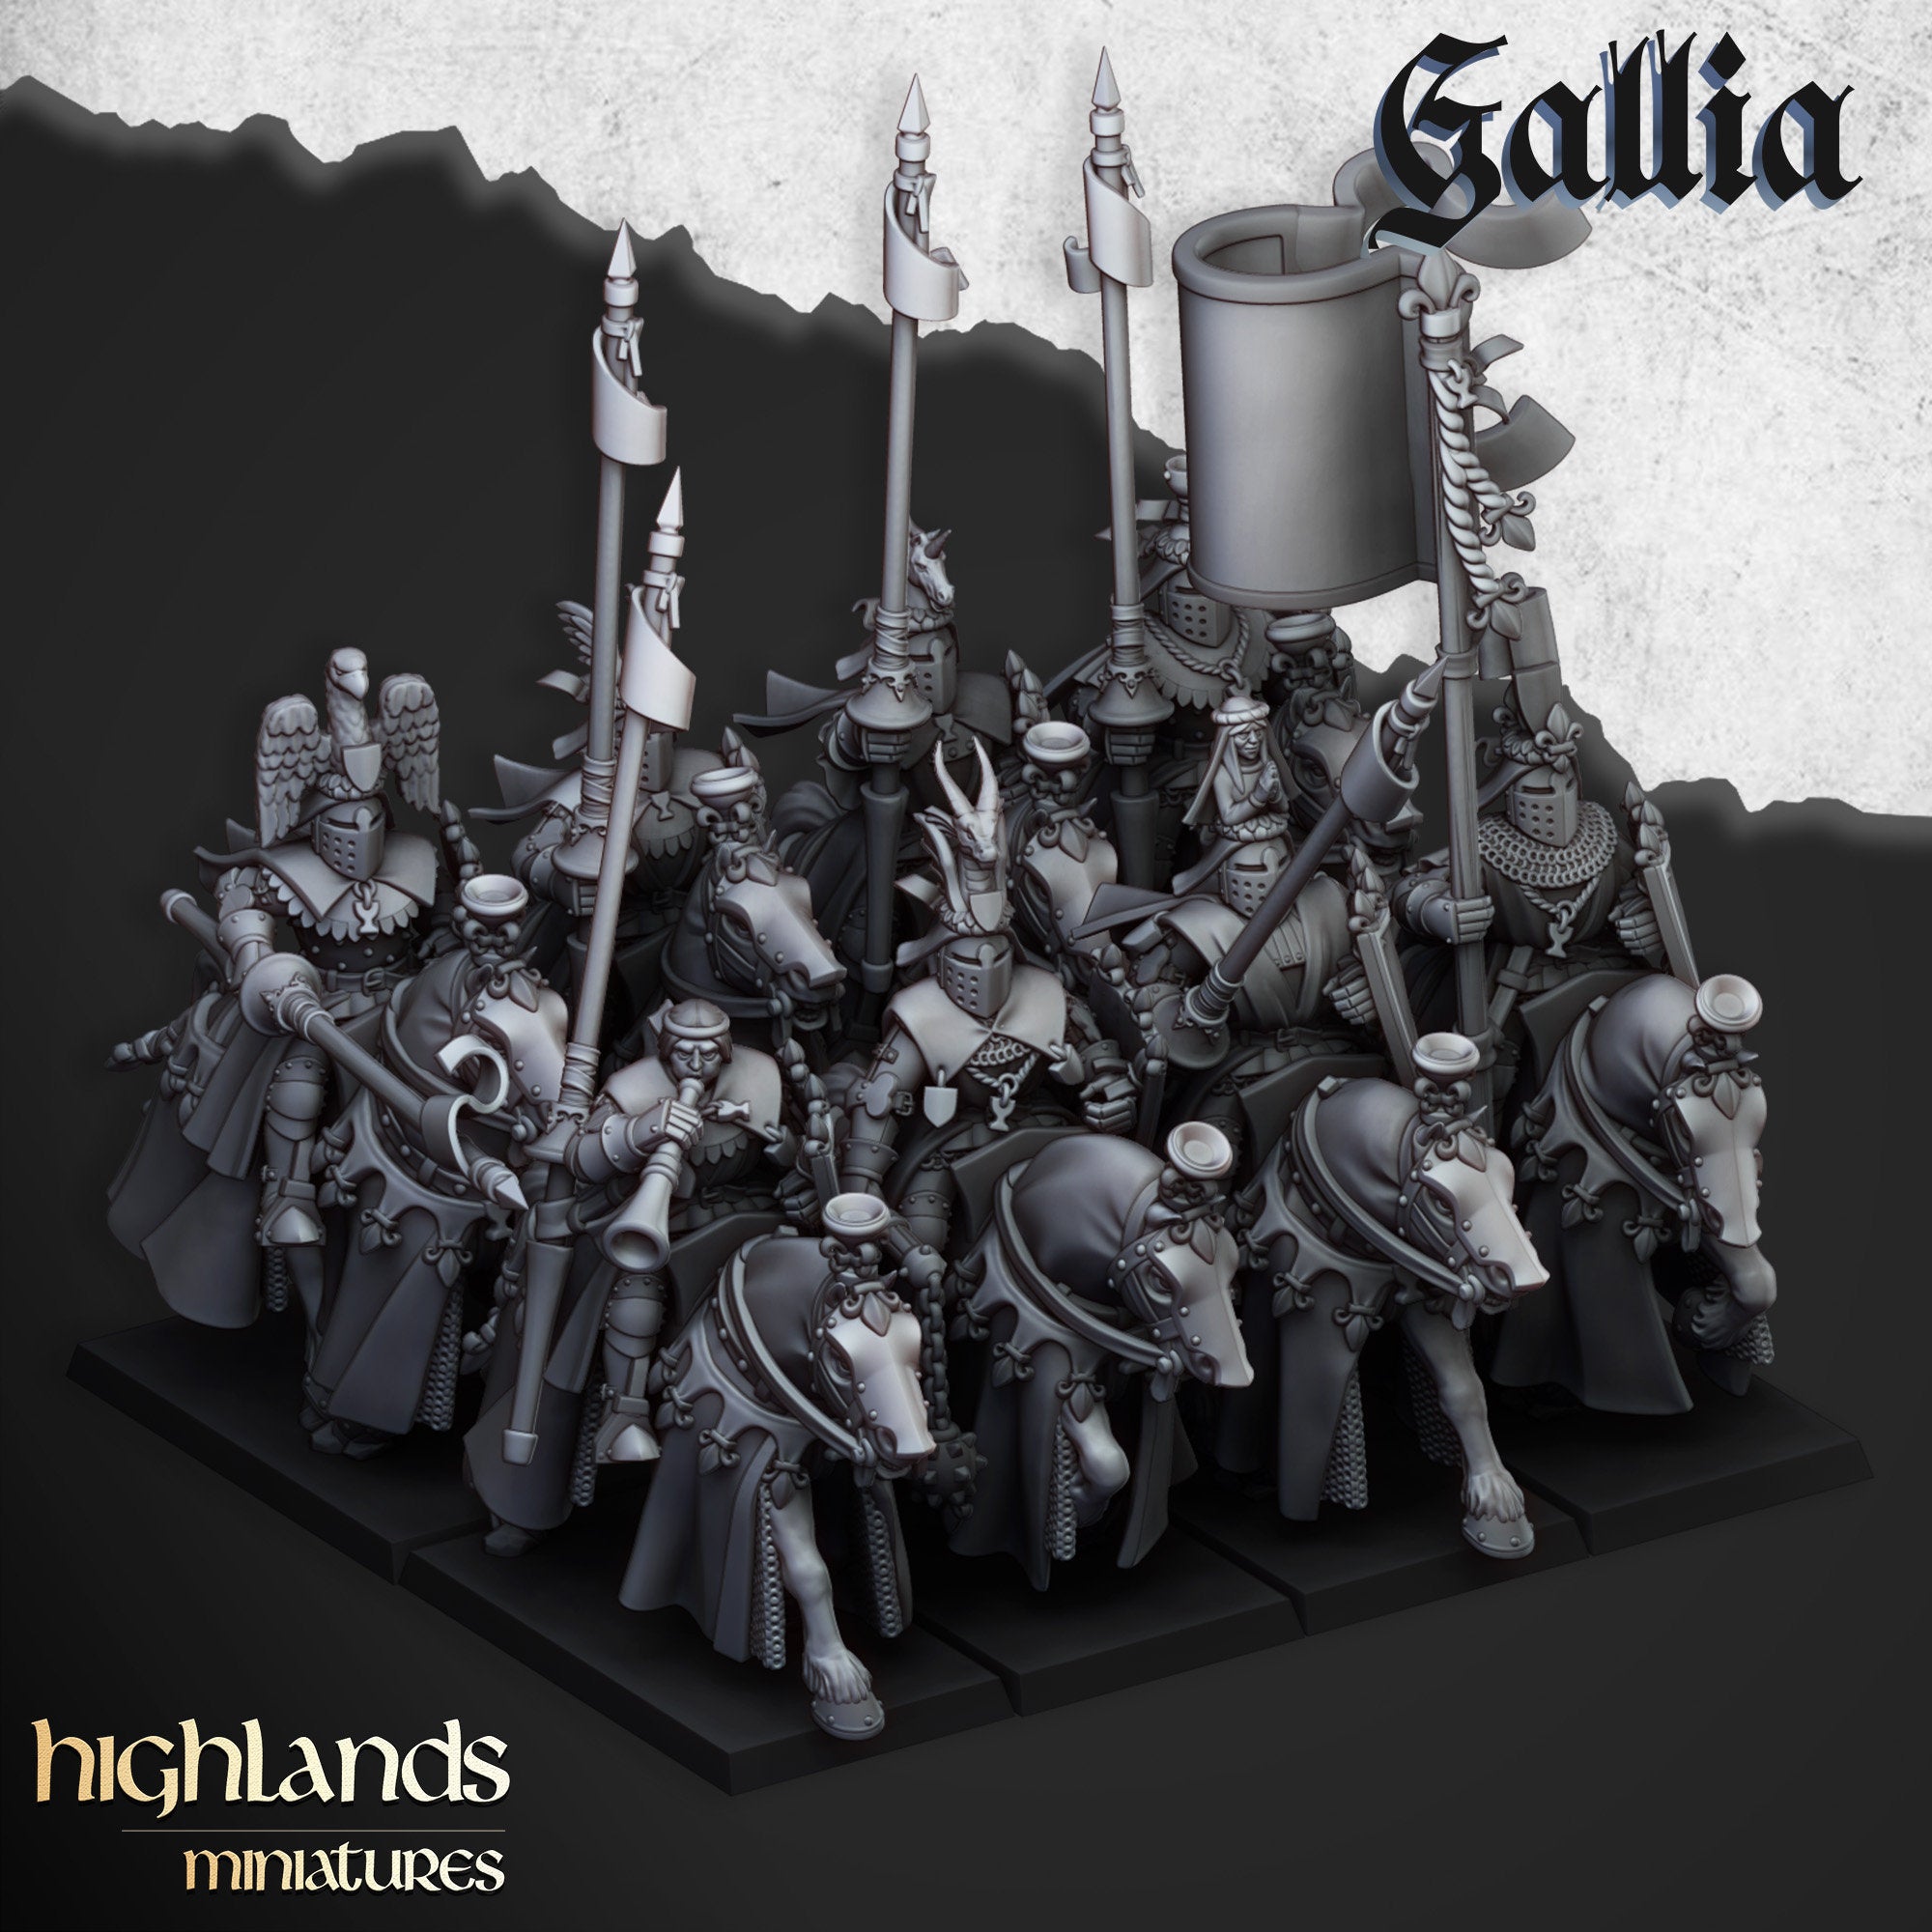 Royal Knights of Gallia  unit  by Highlands Miniatures